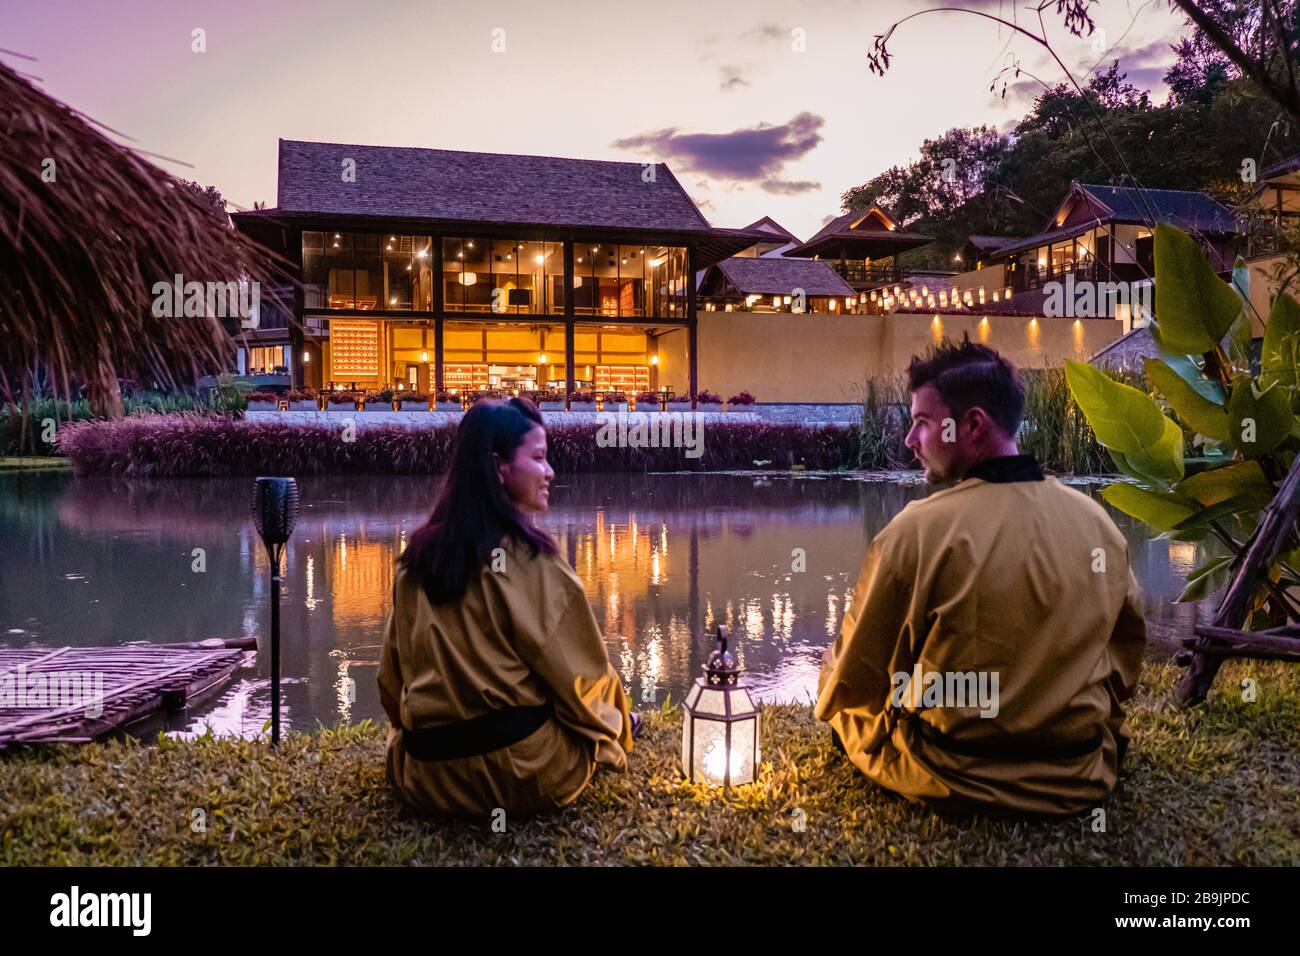 Chiang Mai Thailand November 2018, t japanese onsen bath in Thailand walking outside during sunset Stock Photo